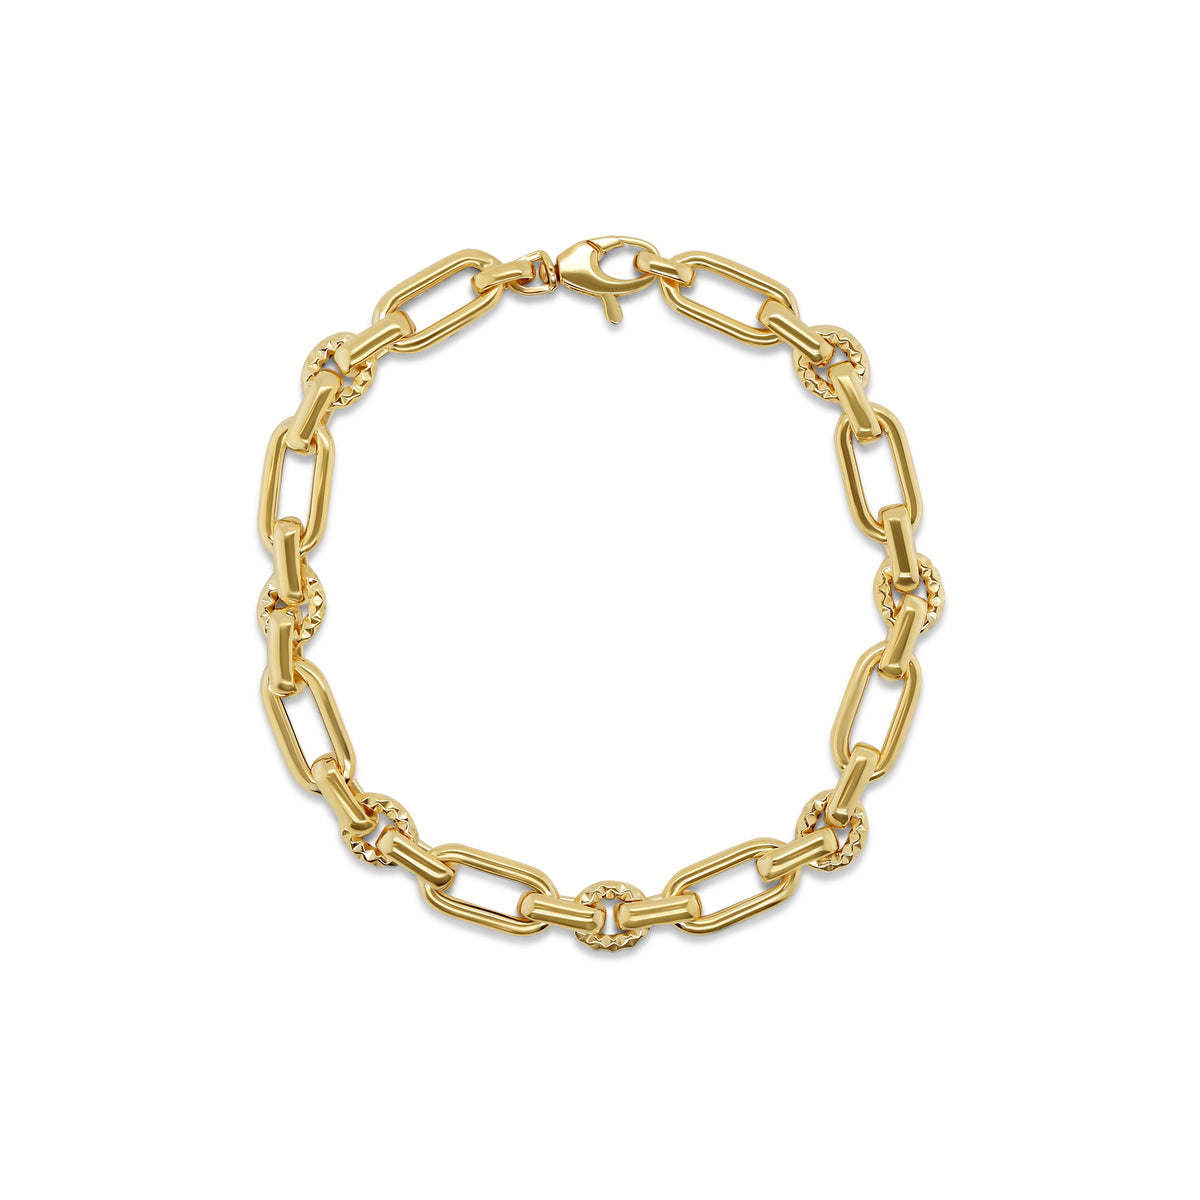 7.5 inch 14k yellow gold chunky chain alternating textured link bracelet